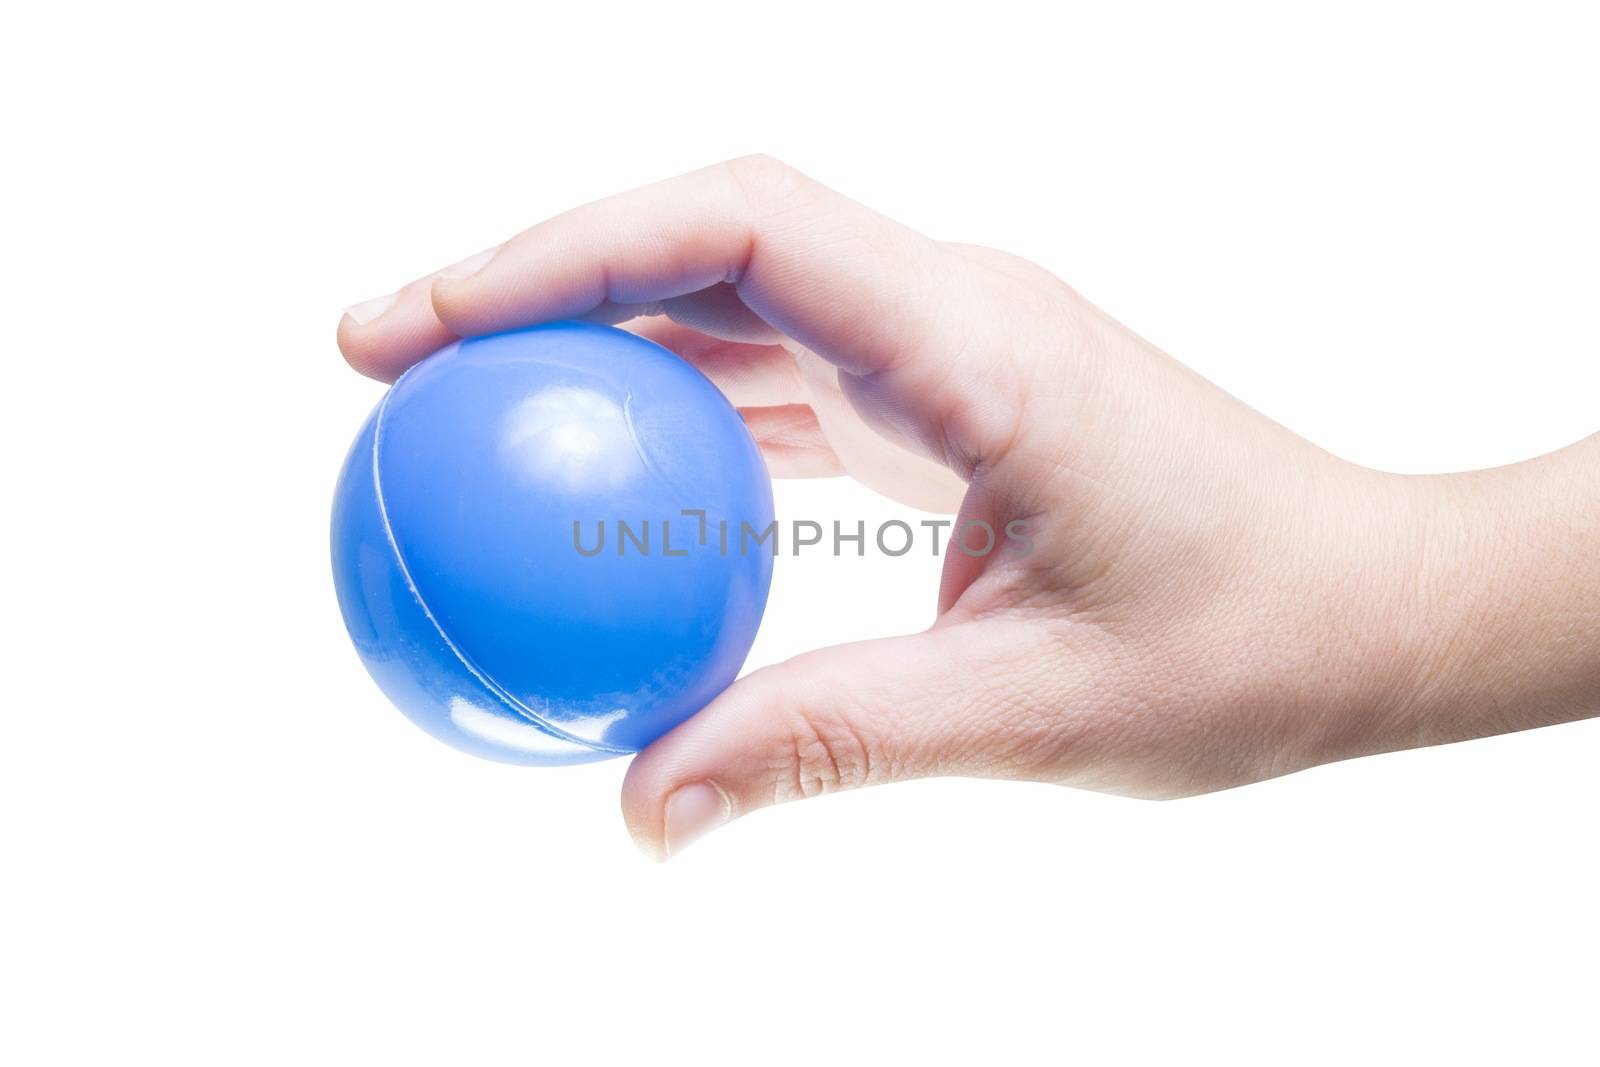 Human hand holding a blue ball, white background.